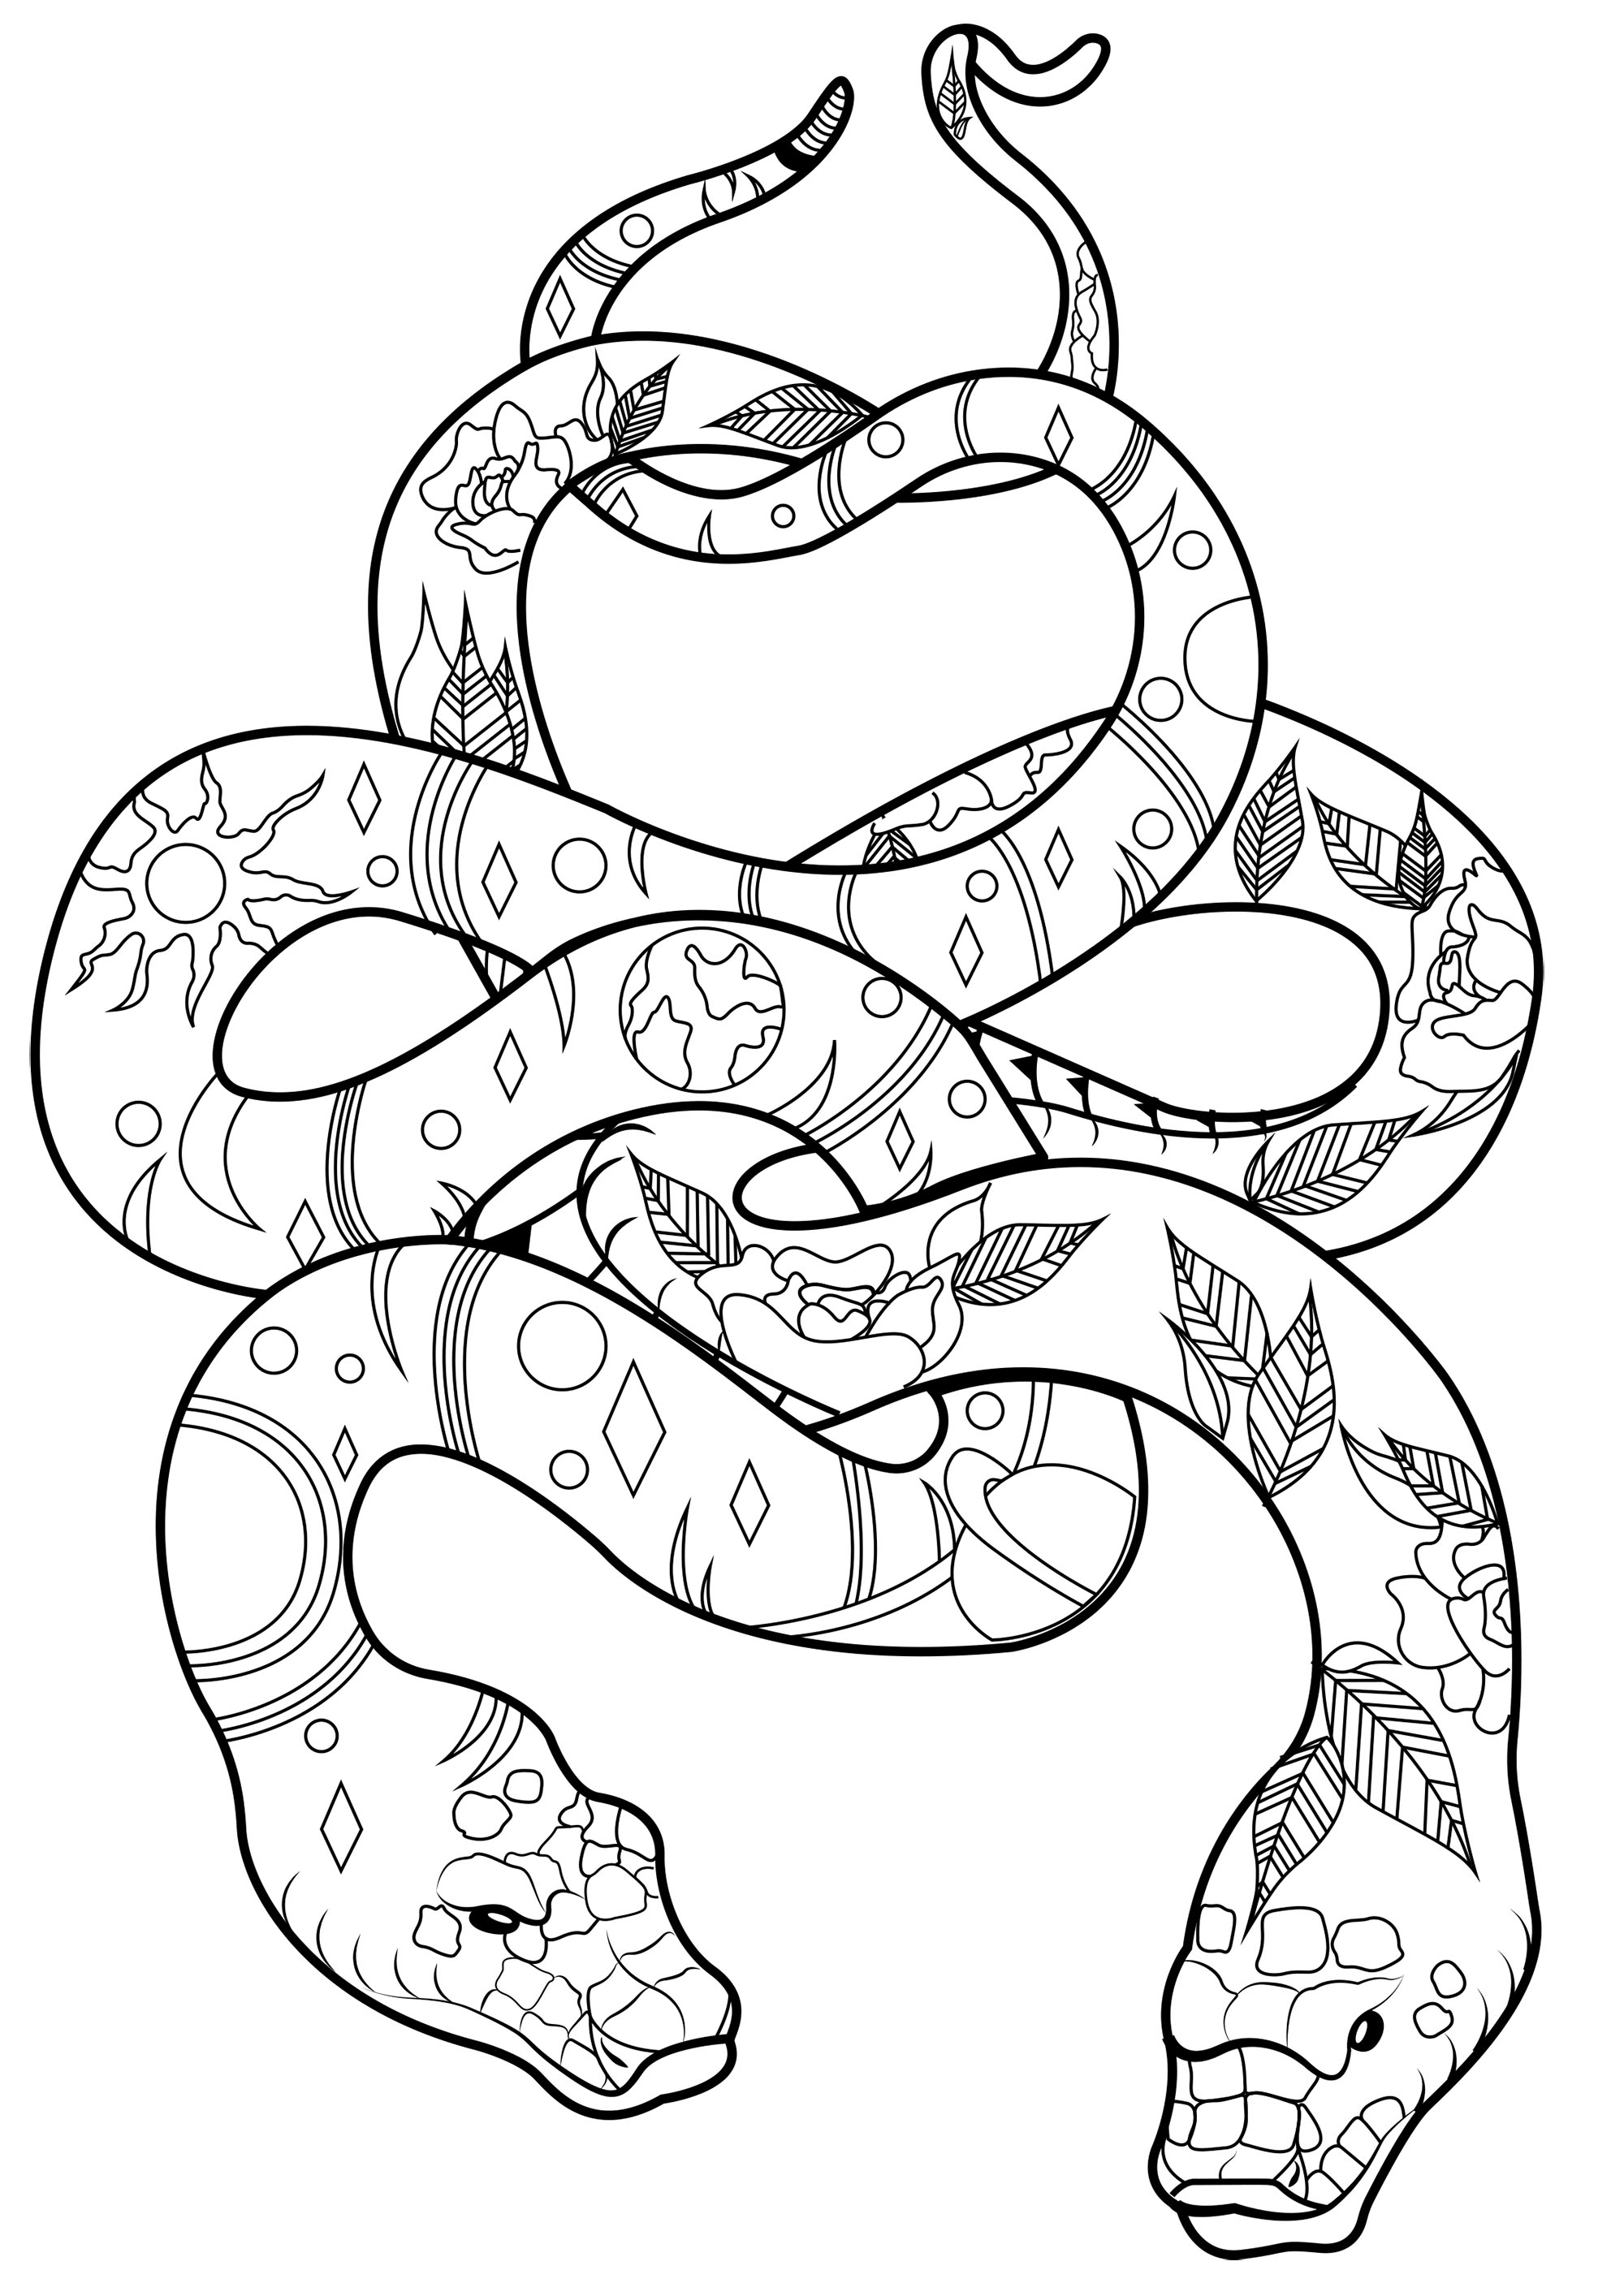 Two magnificent and elegant snakes, linked together, and full of cool patterns to color, Artist : Arwen